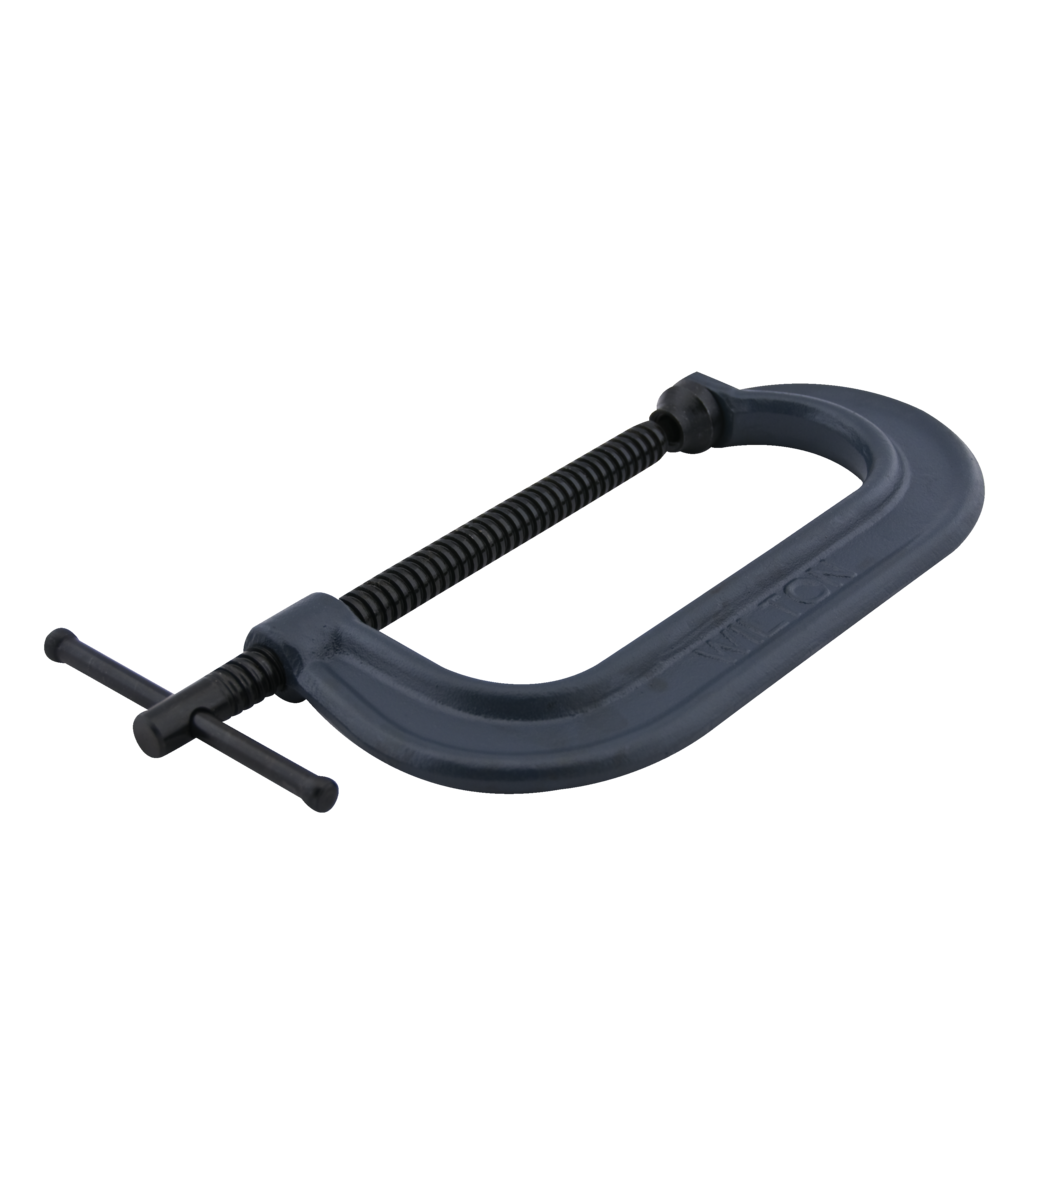 WILTON 800 Series Standard Depth Drop Forged C-Clamp, 0 -4” Opening, 2-5/16” Throat